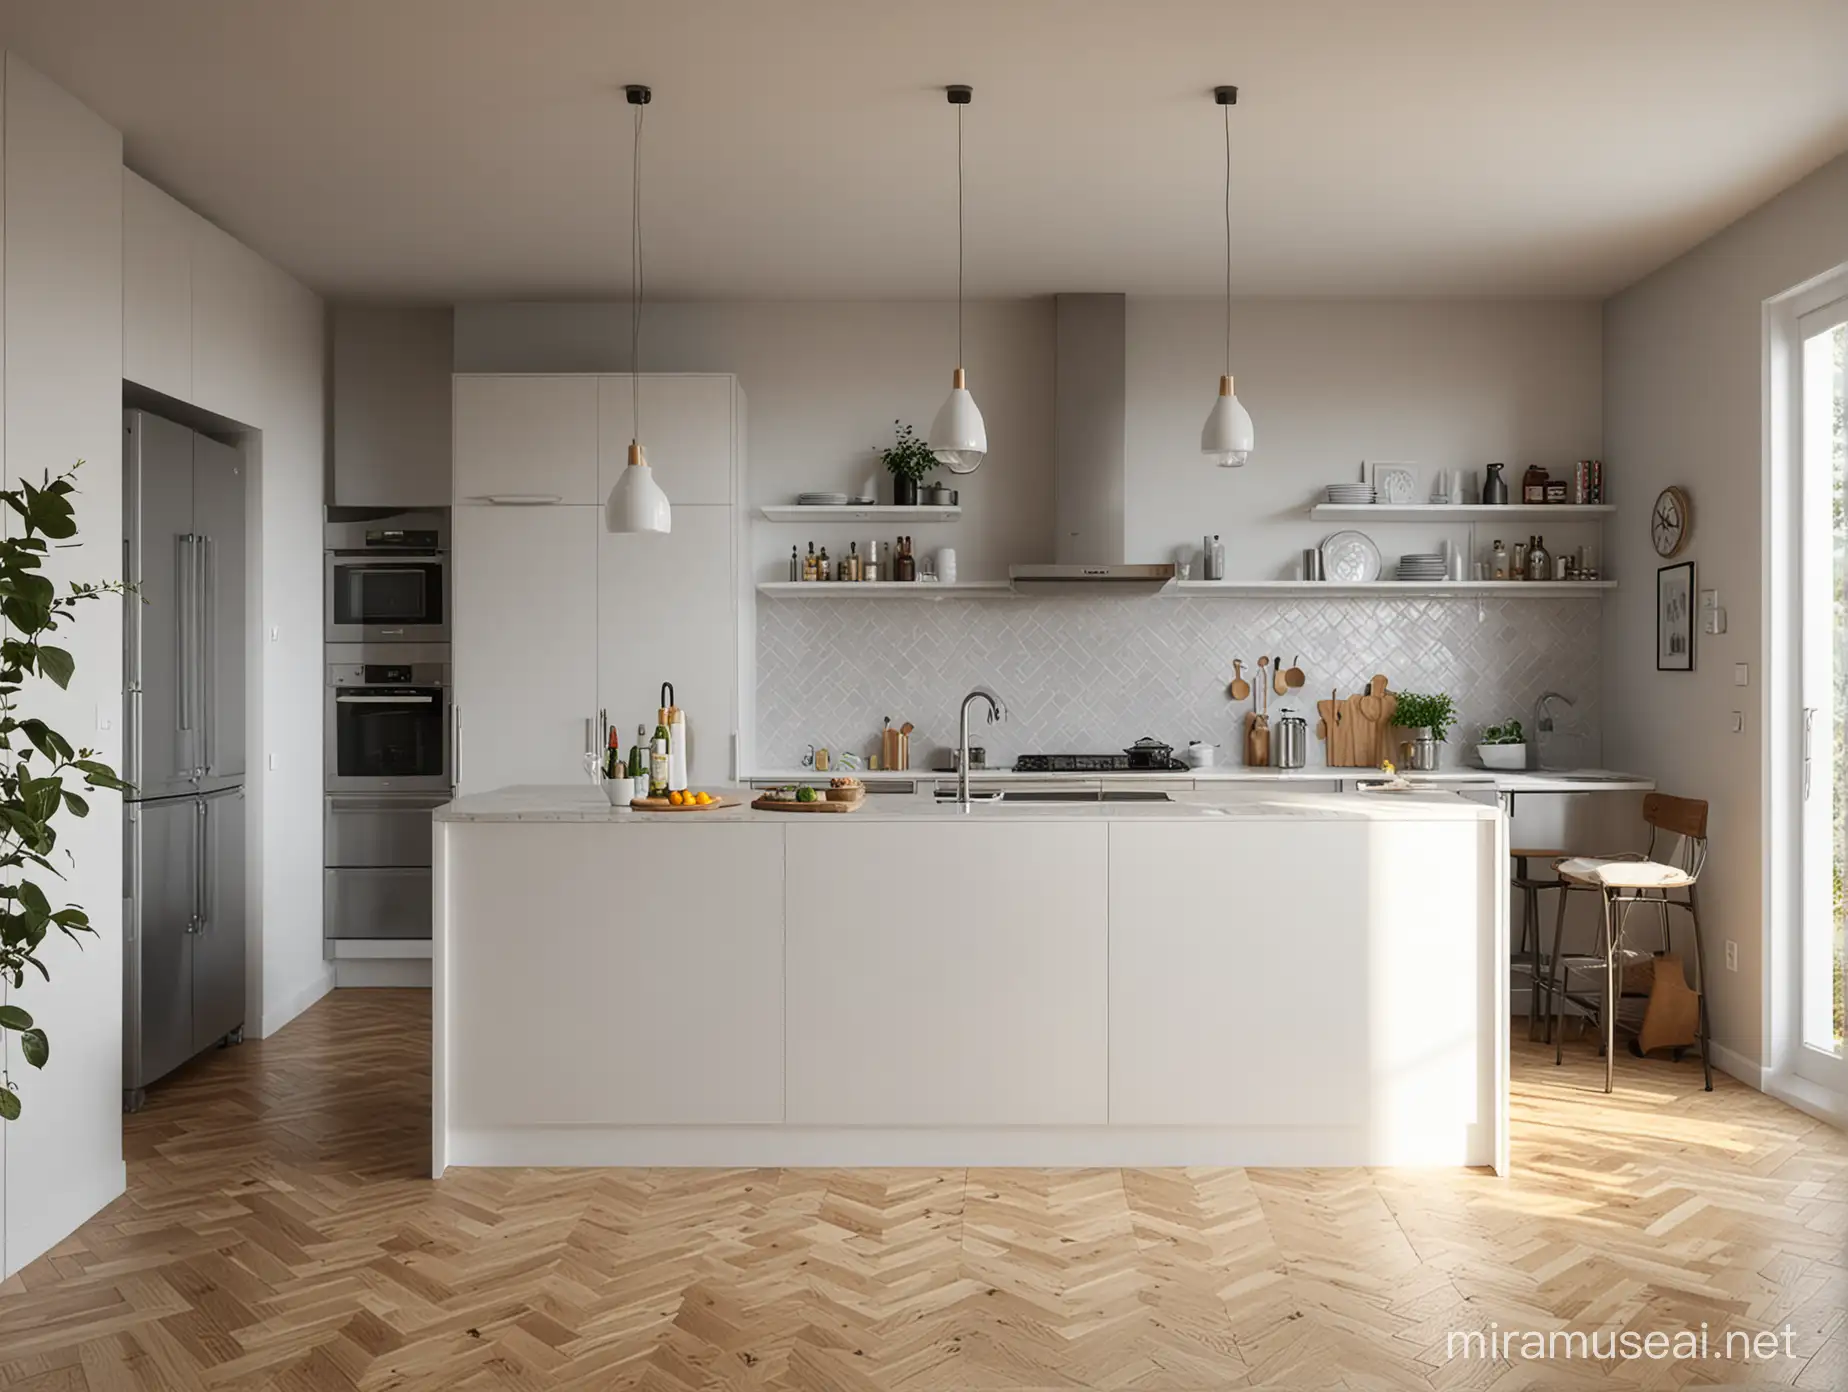 Bright Modern Kitchen with Decorative Accents Contemporary Design in White and Gray Tones